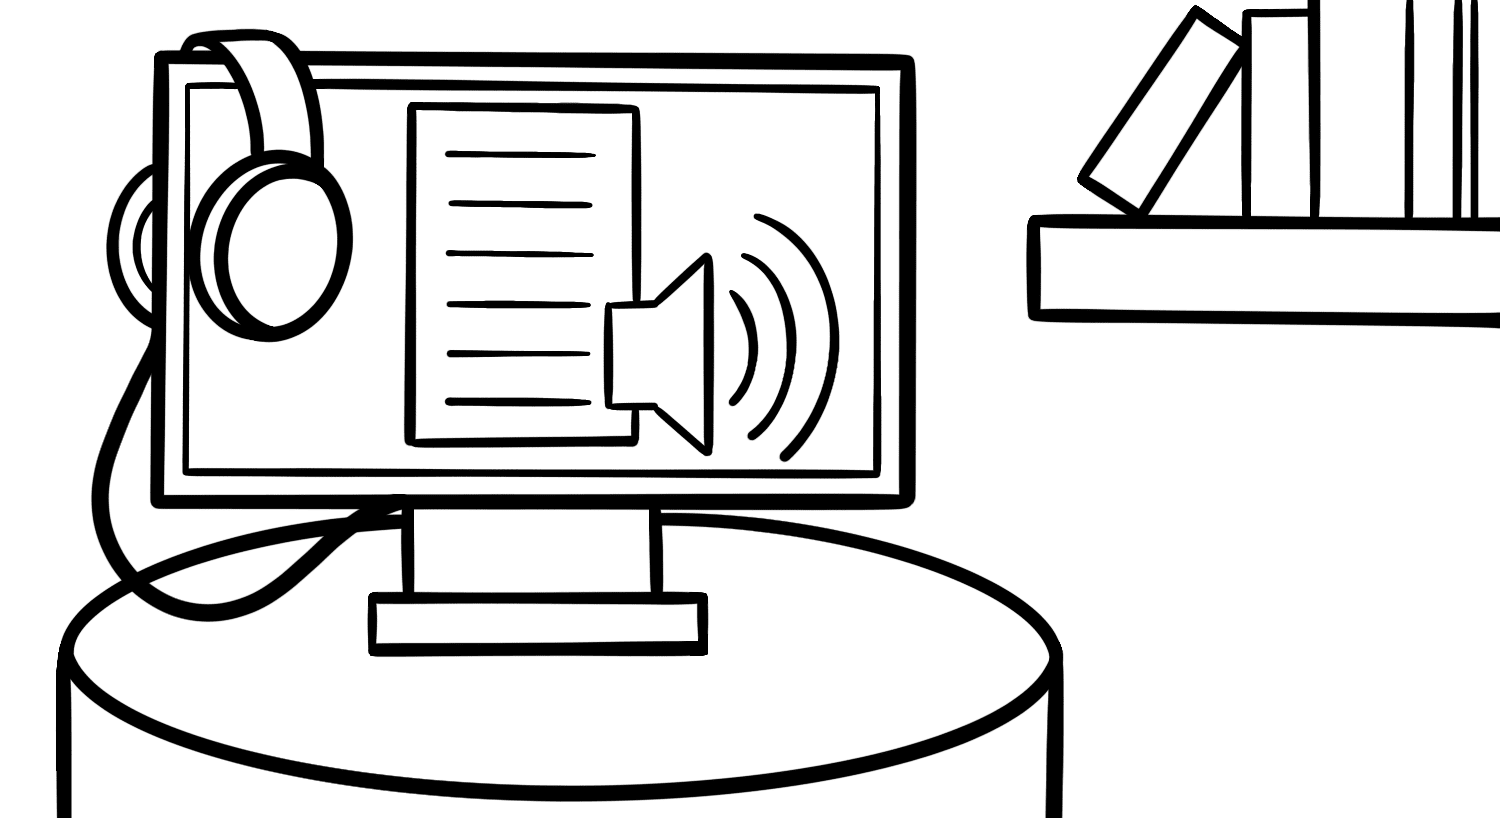 Illustration: A desktop computer sits on a round table, with over-ear headphones resting on the edge of the monitor. The screen displays a word document with a large speaker with sound icon, representing screen reader software.